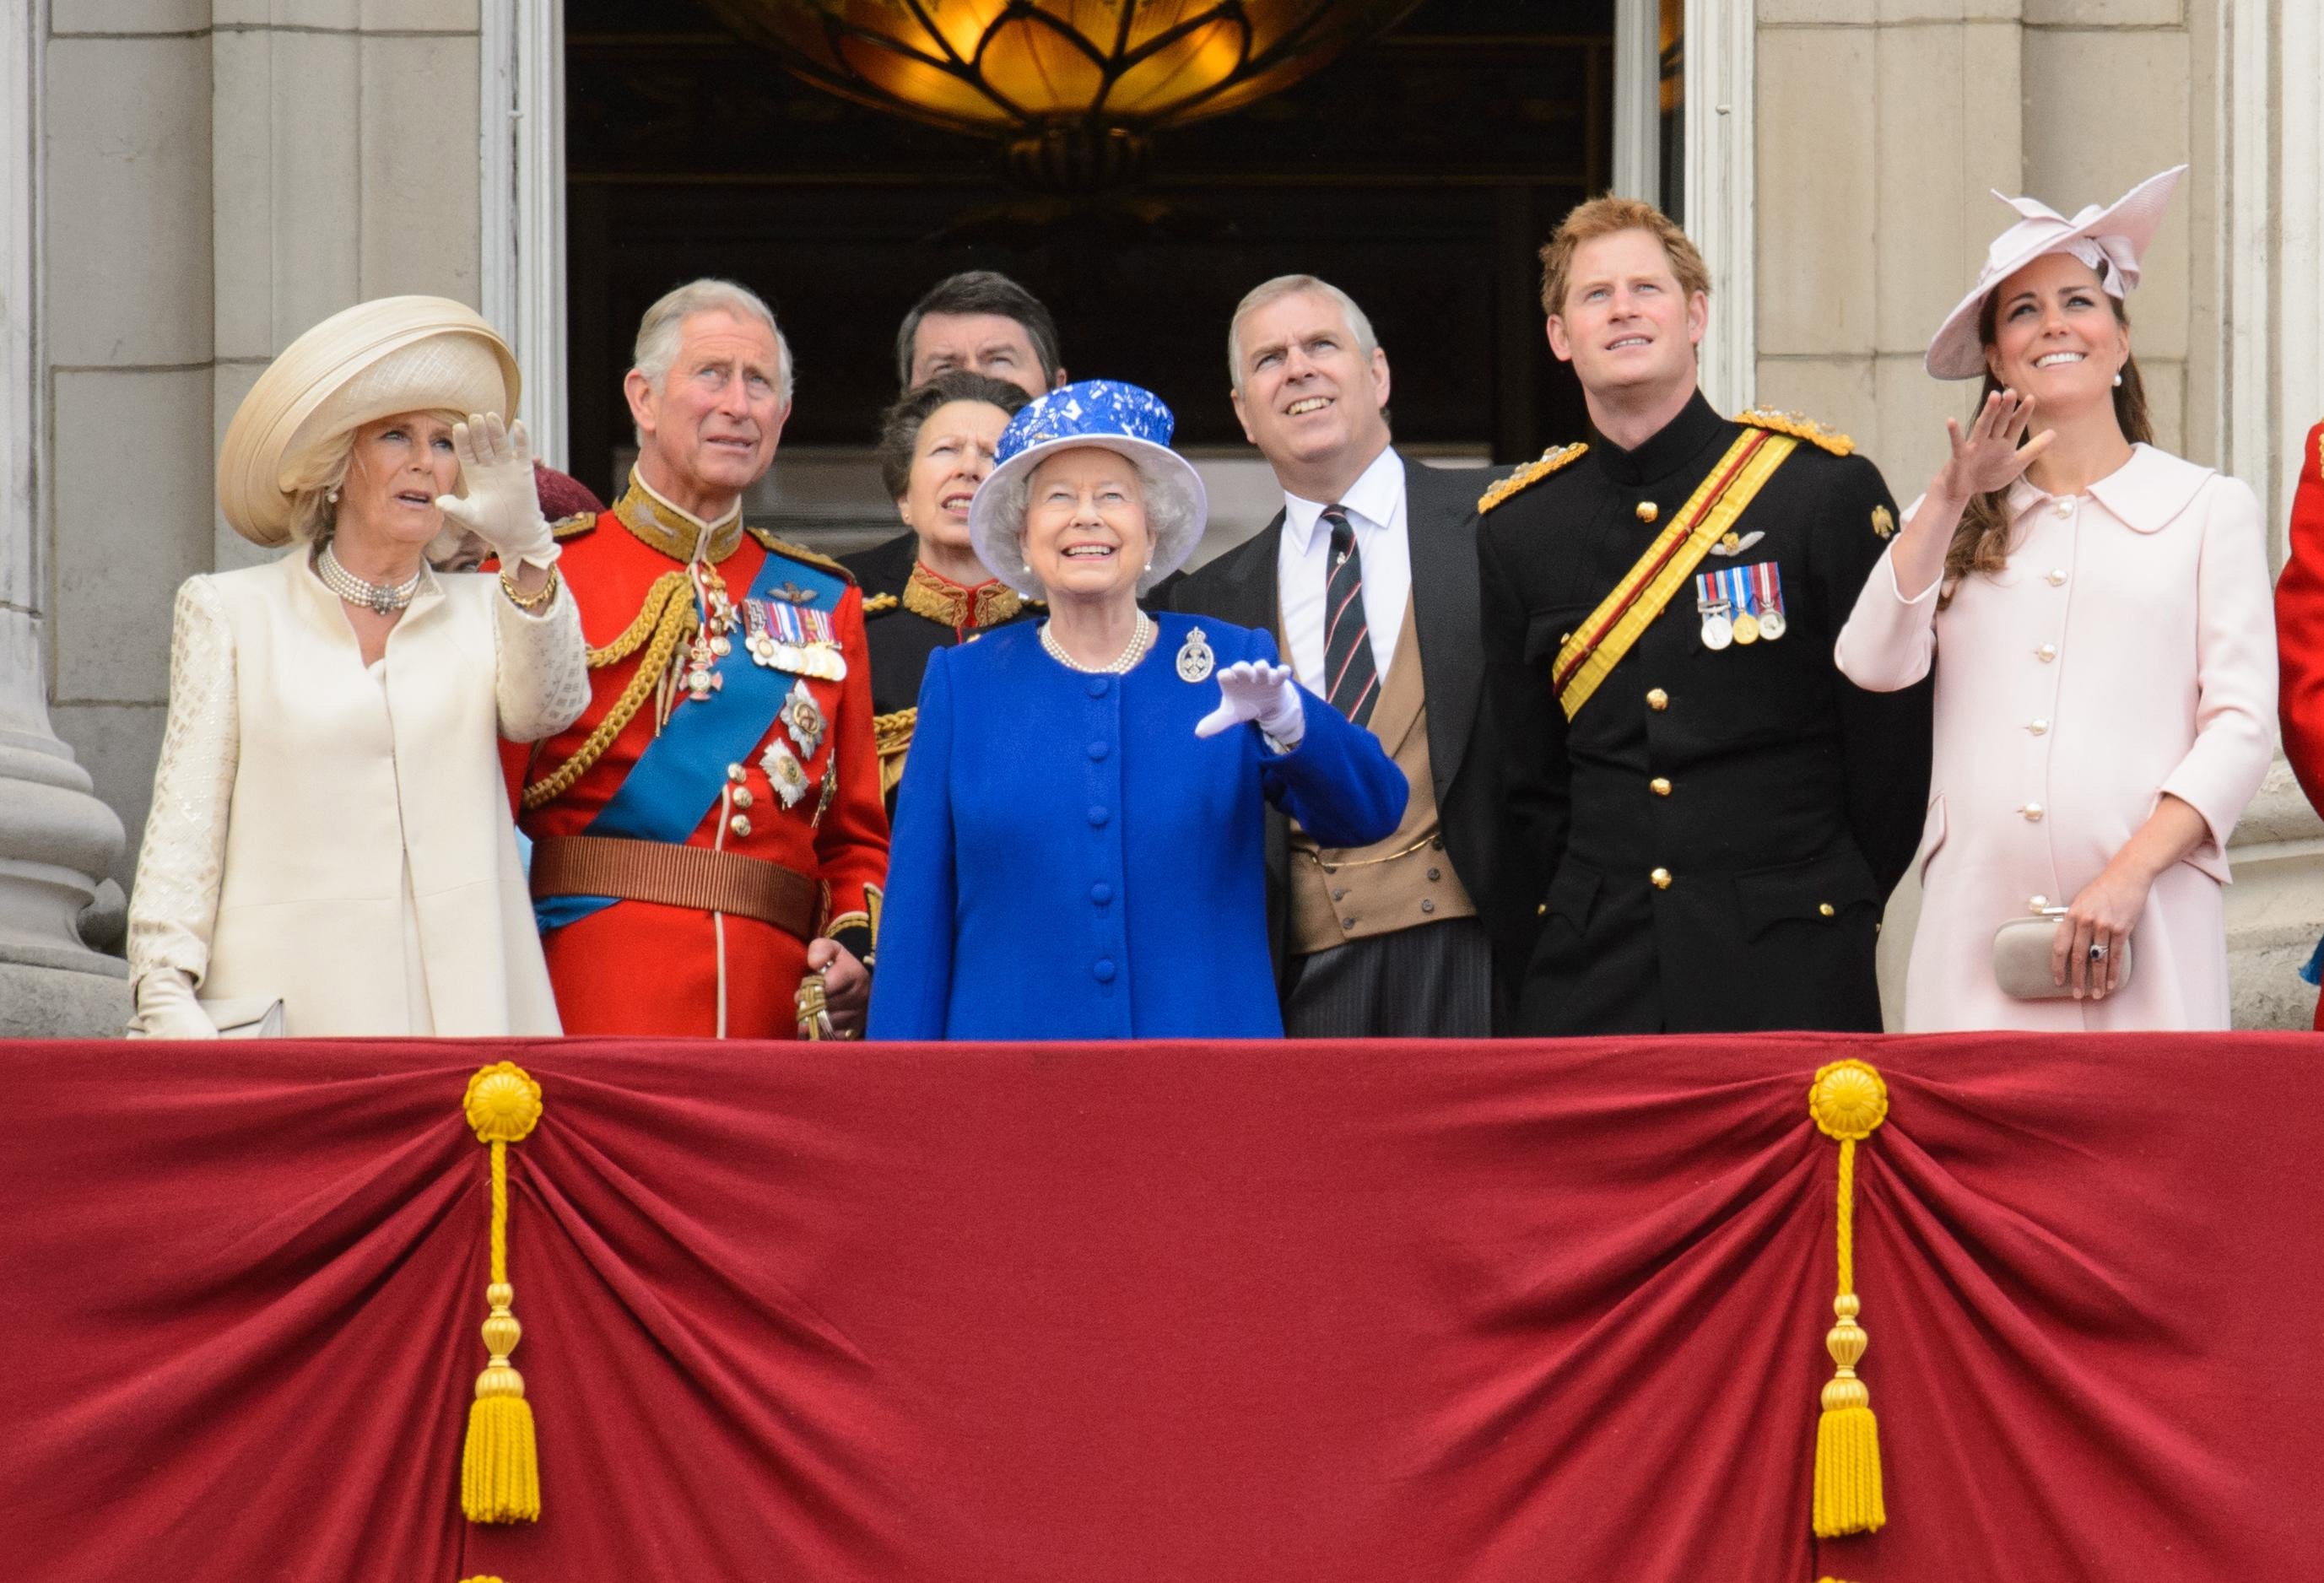 The Queen at the 2013 Trooping the Colour in Buckingham Palace (PA)